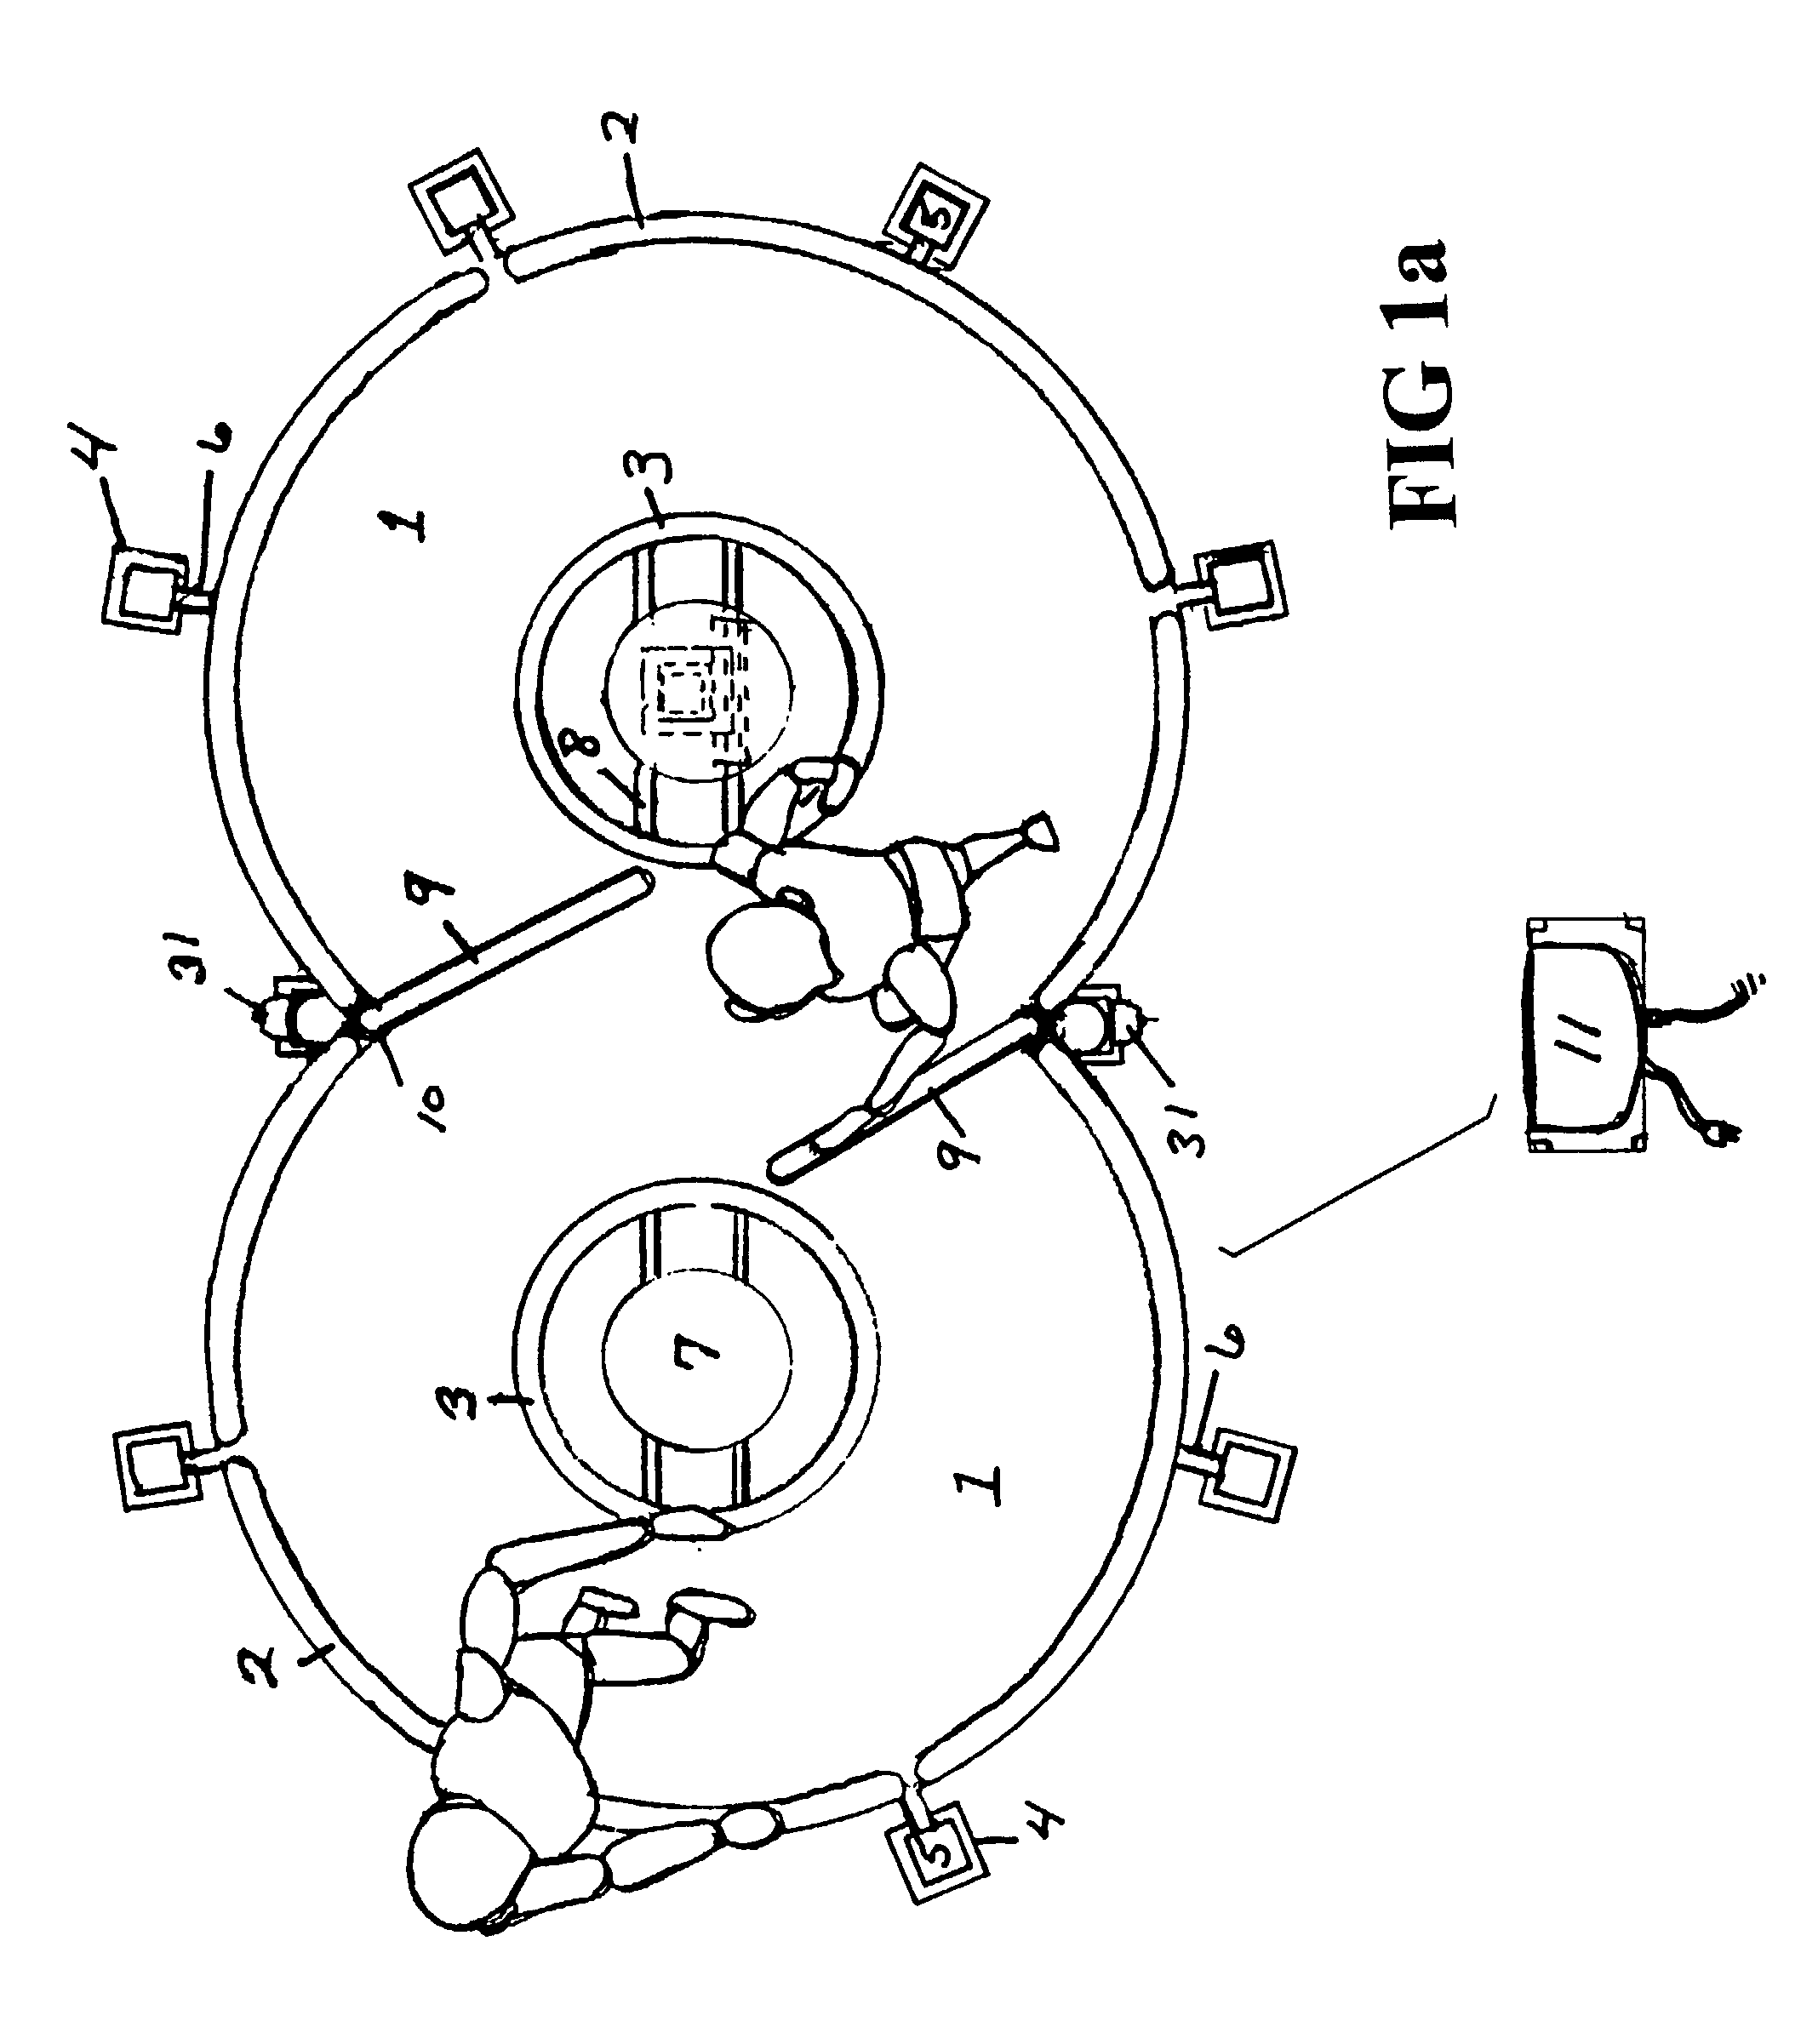 "Figure-eight" track, apparatus and method for sensory-motor exercise